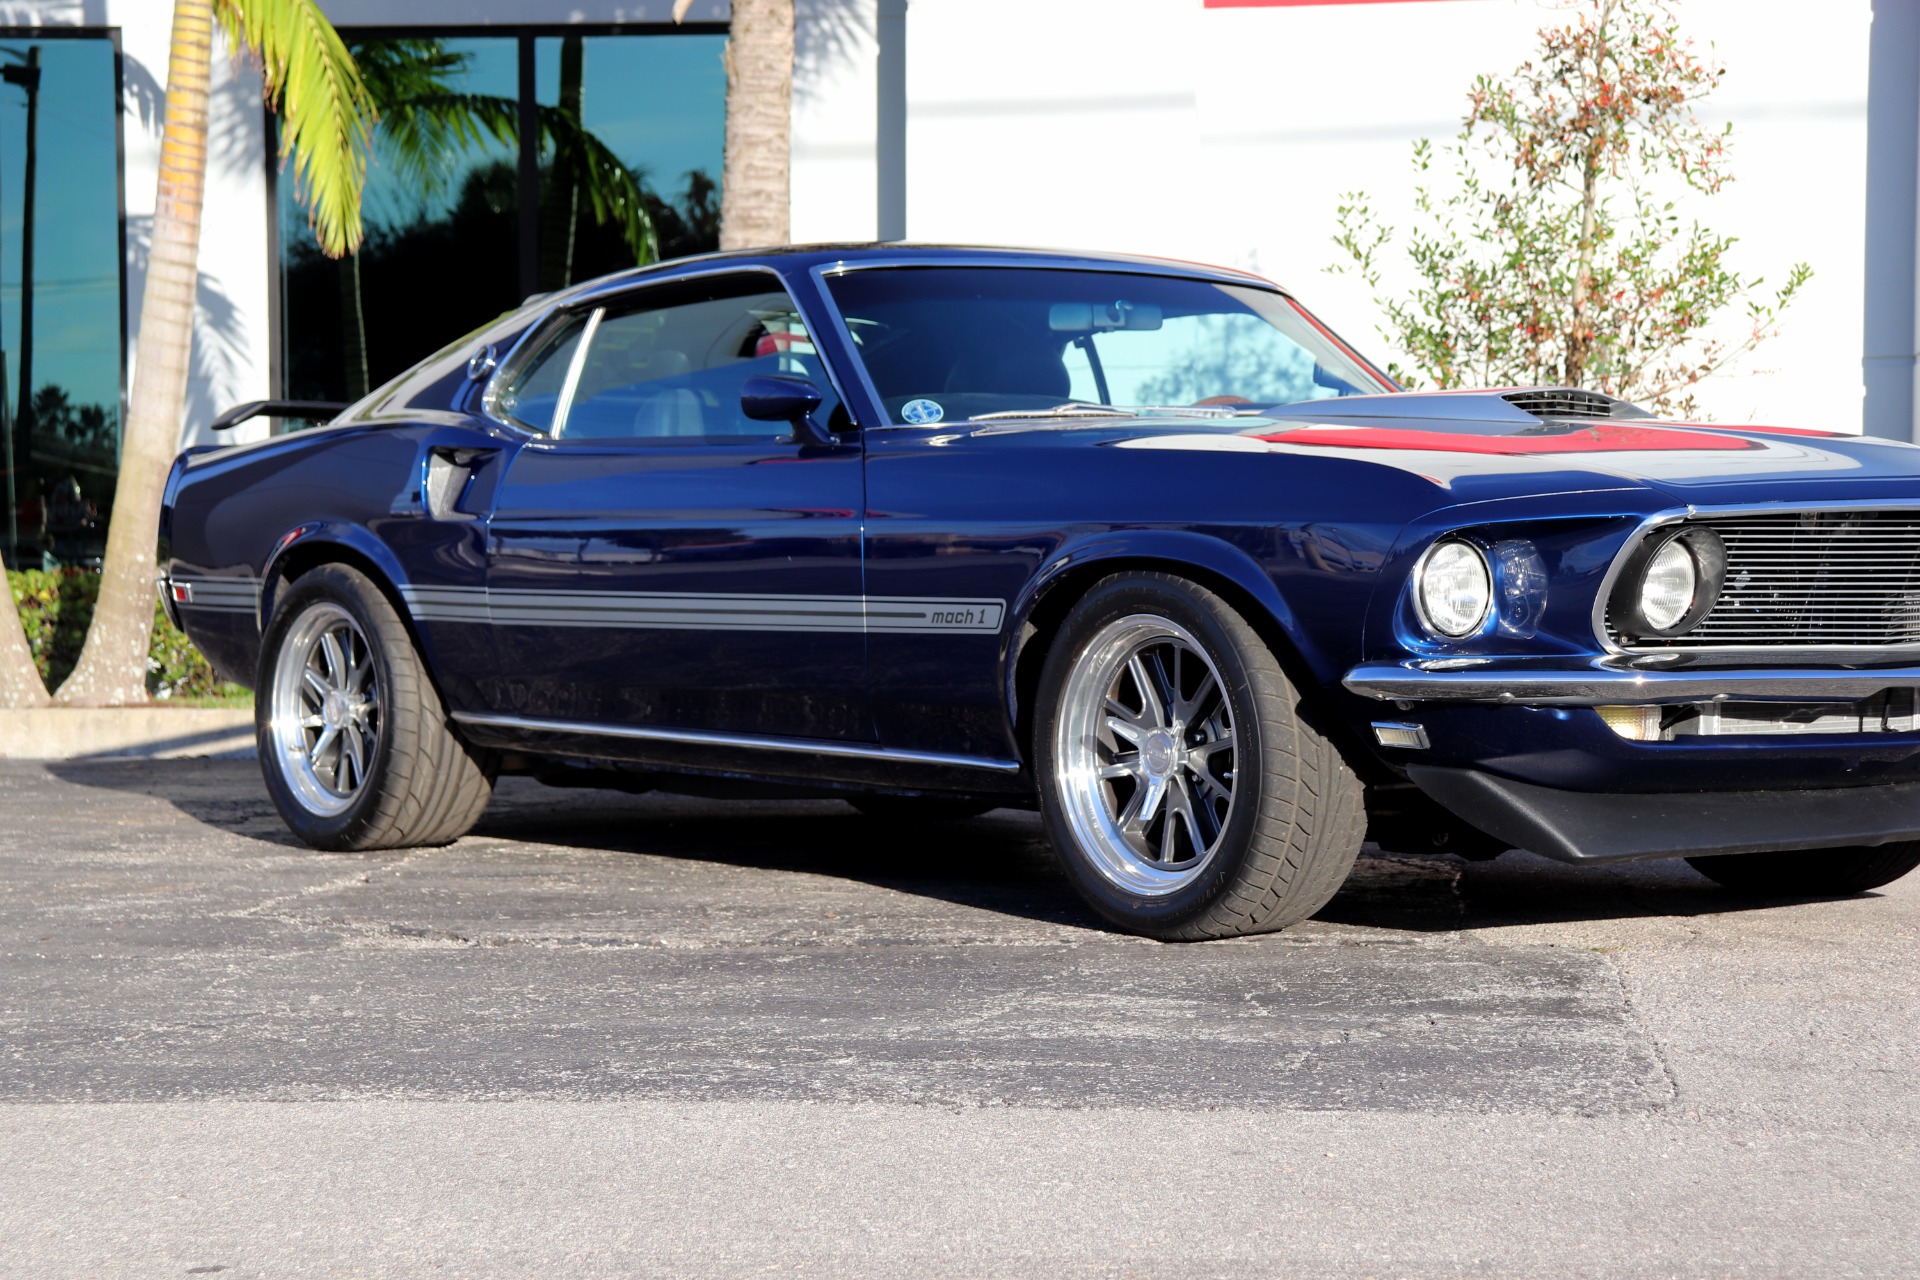 Used 1969 Ford Mustang Mach 1 For Sale ($124,900) | Marino Performance ...